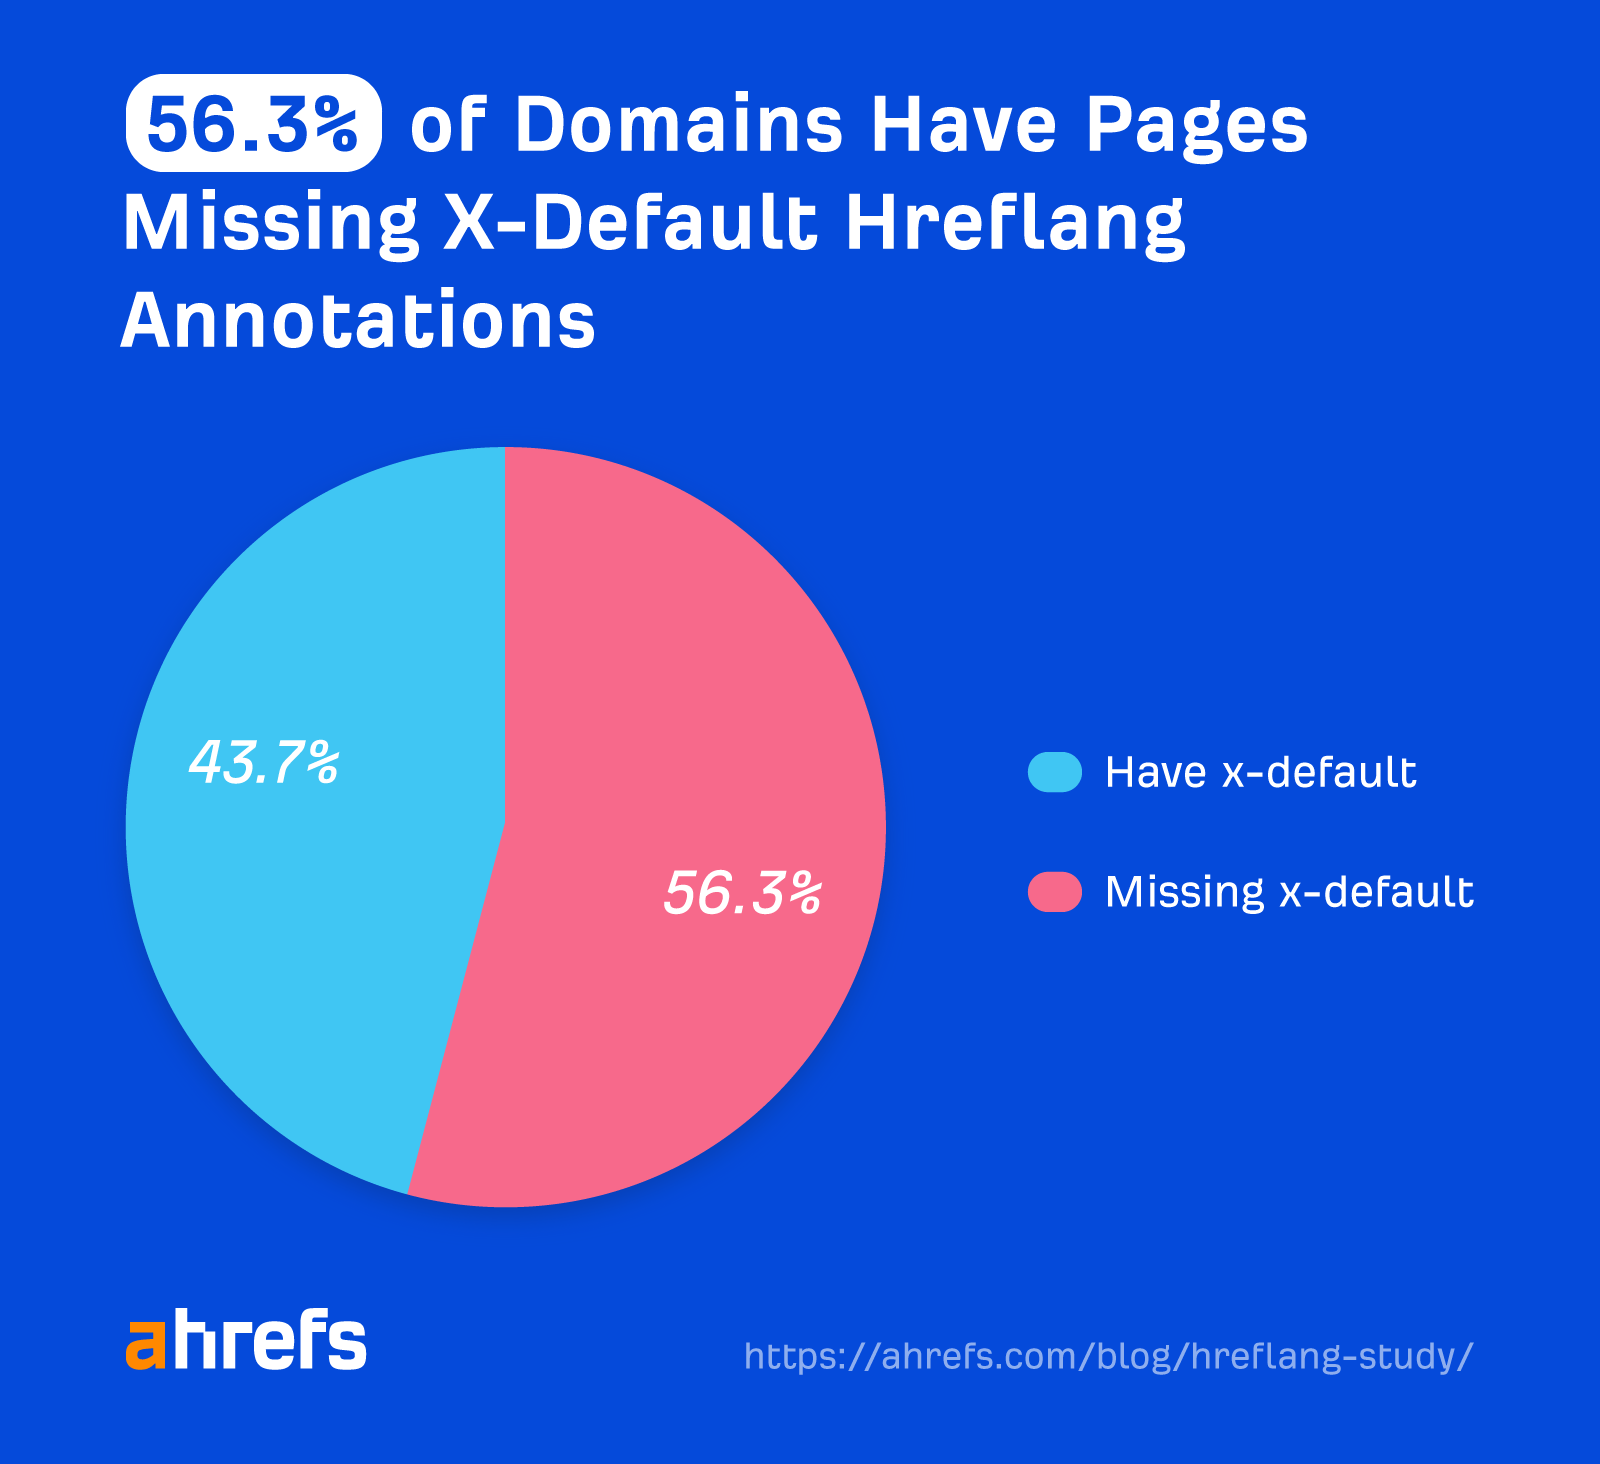 56.3% of domains have pages missing x-default hreflang annotations